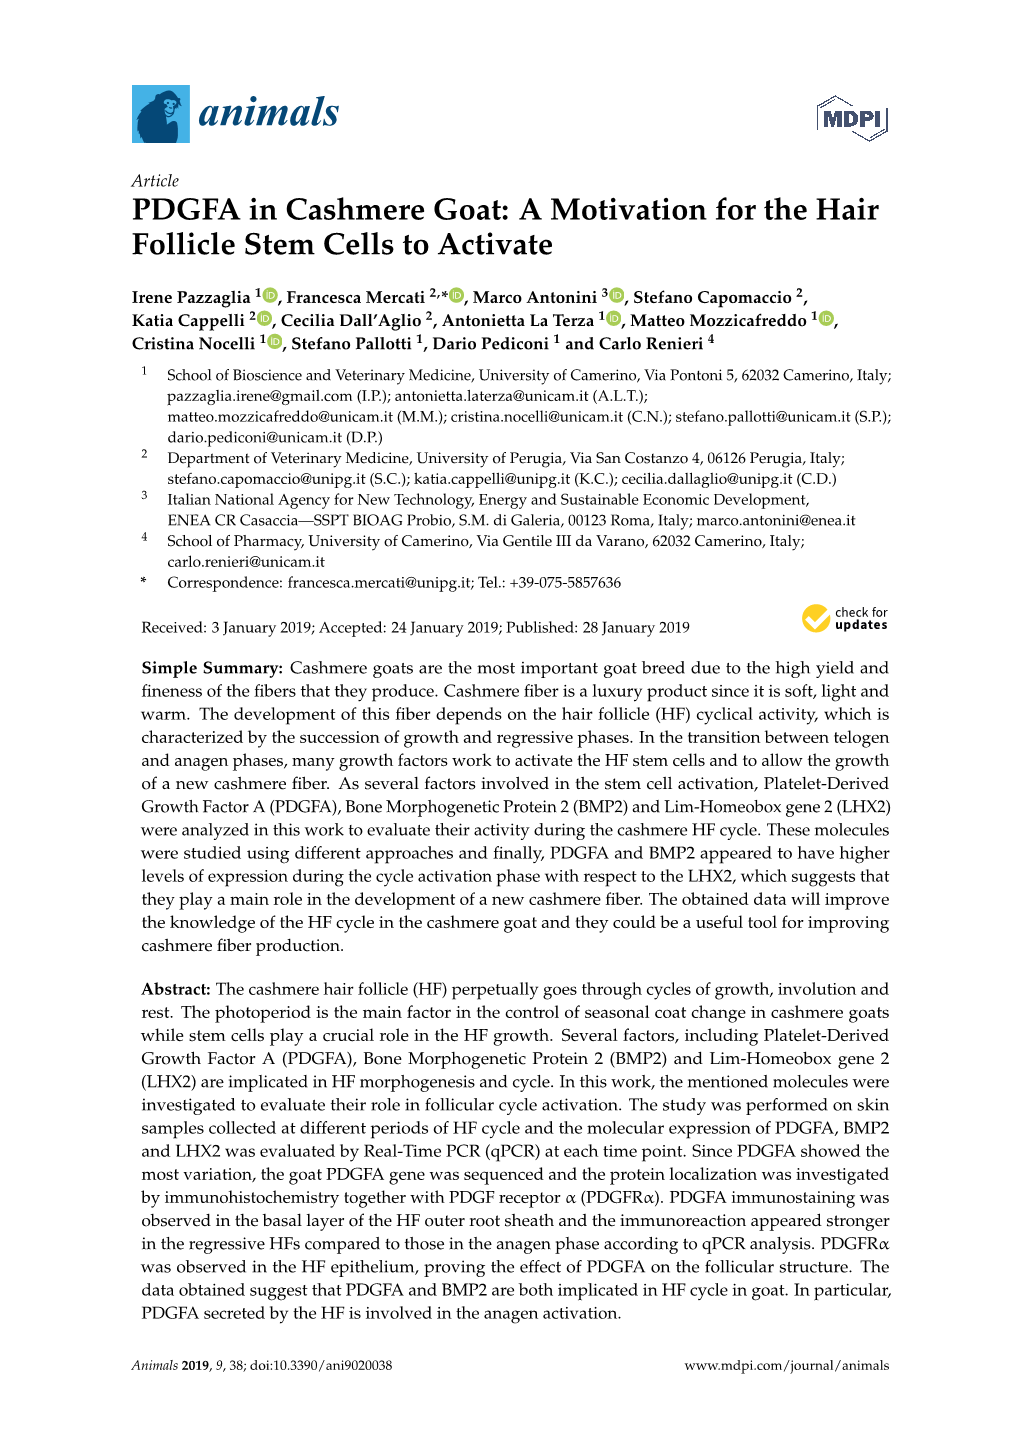 PDGFA in Cashmere Goat: a Motivation for the Hair Follicle Stem Cells to Activate